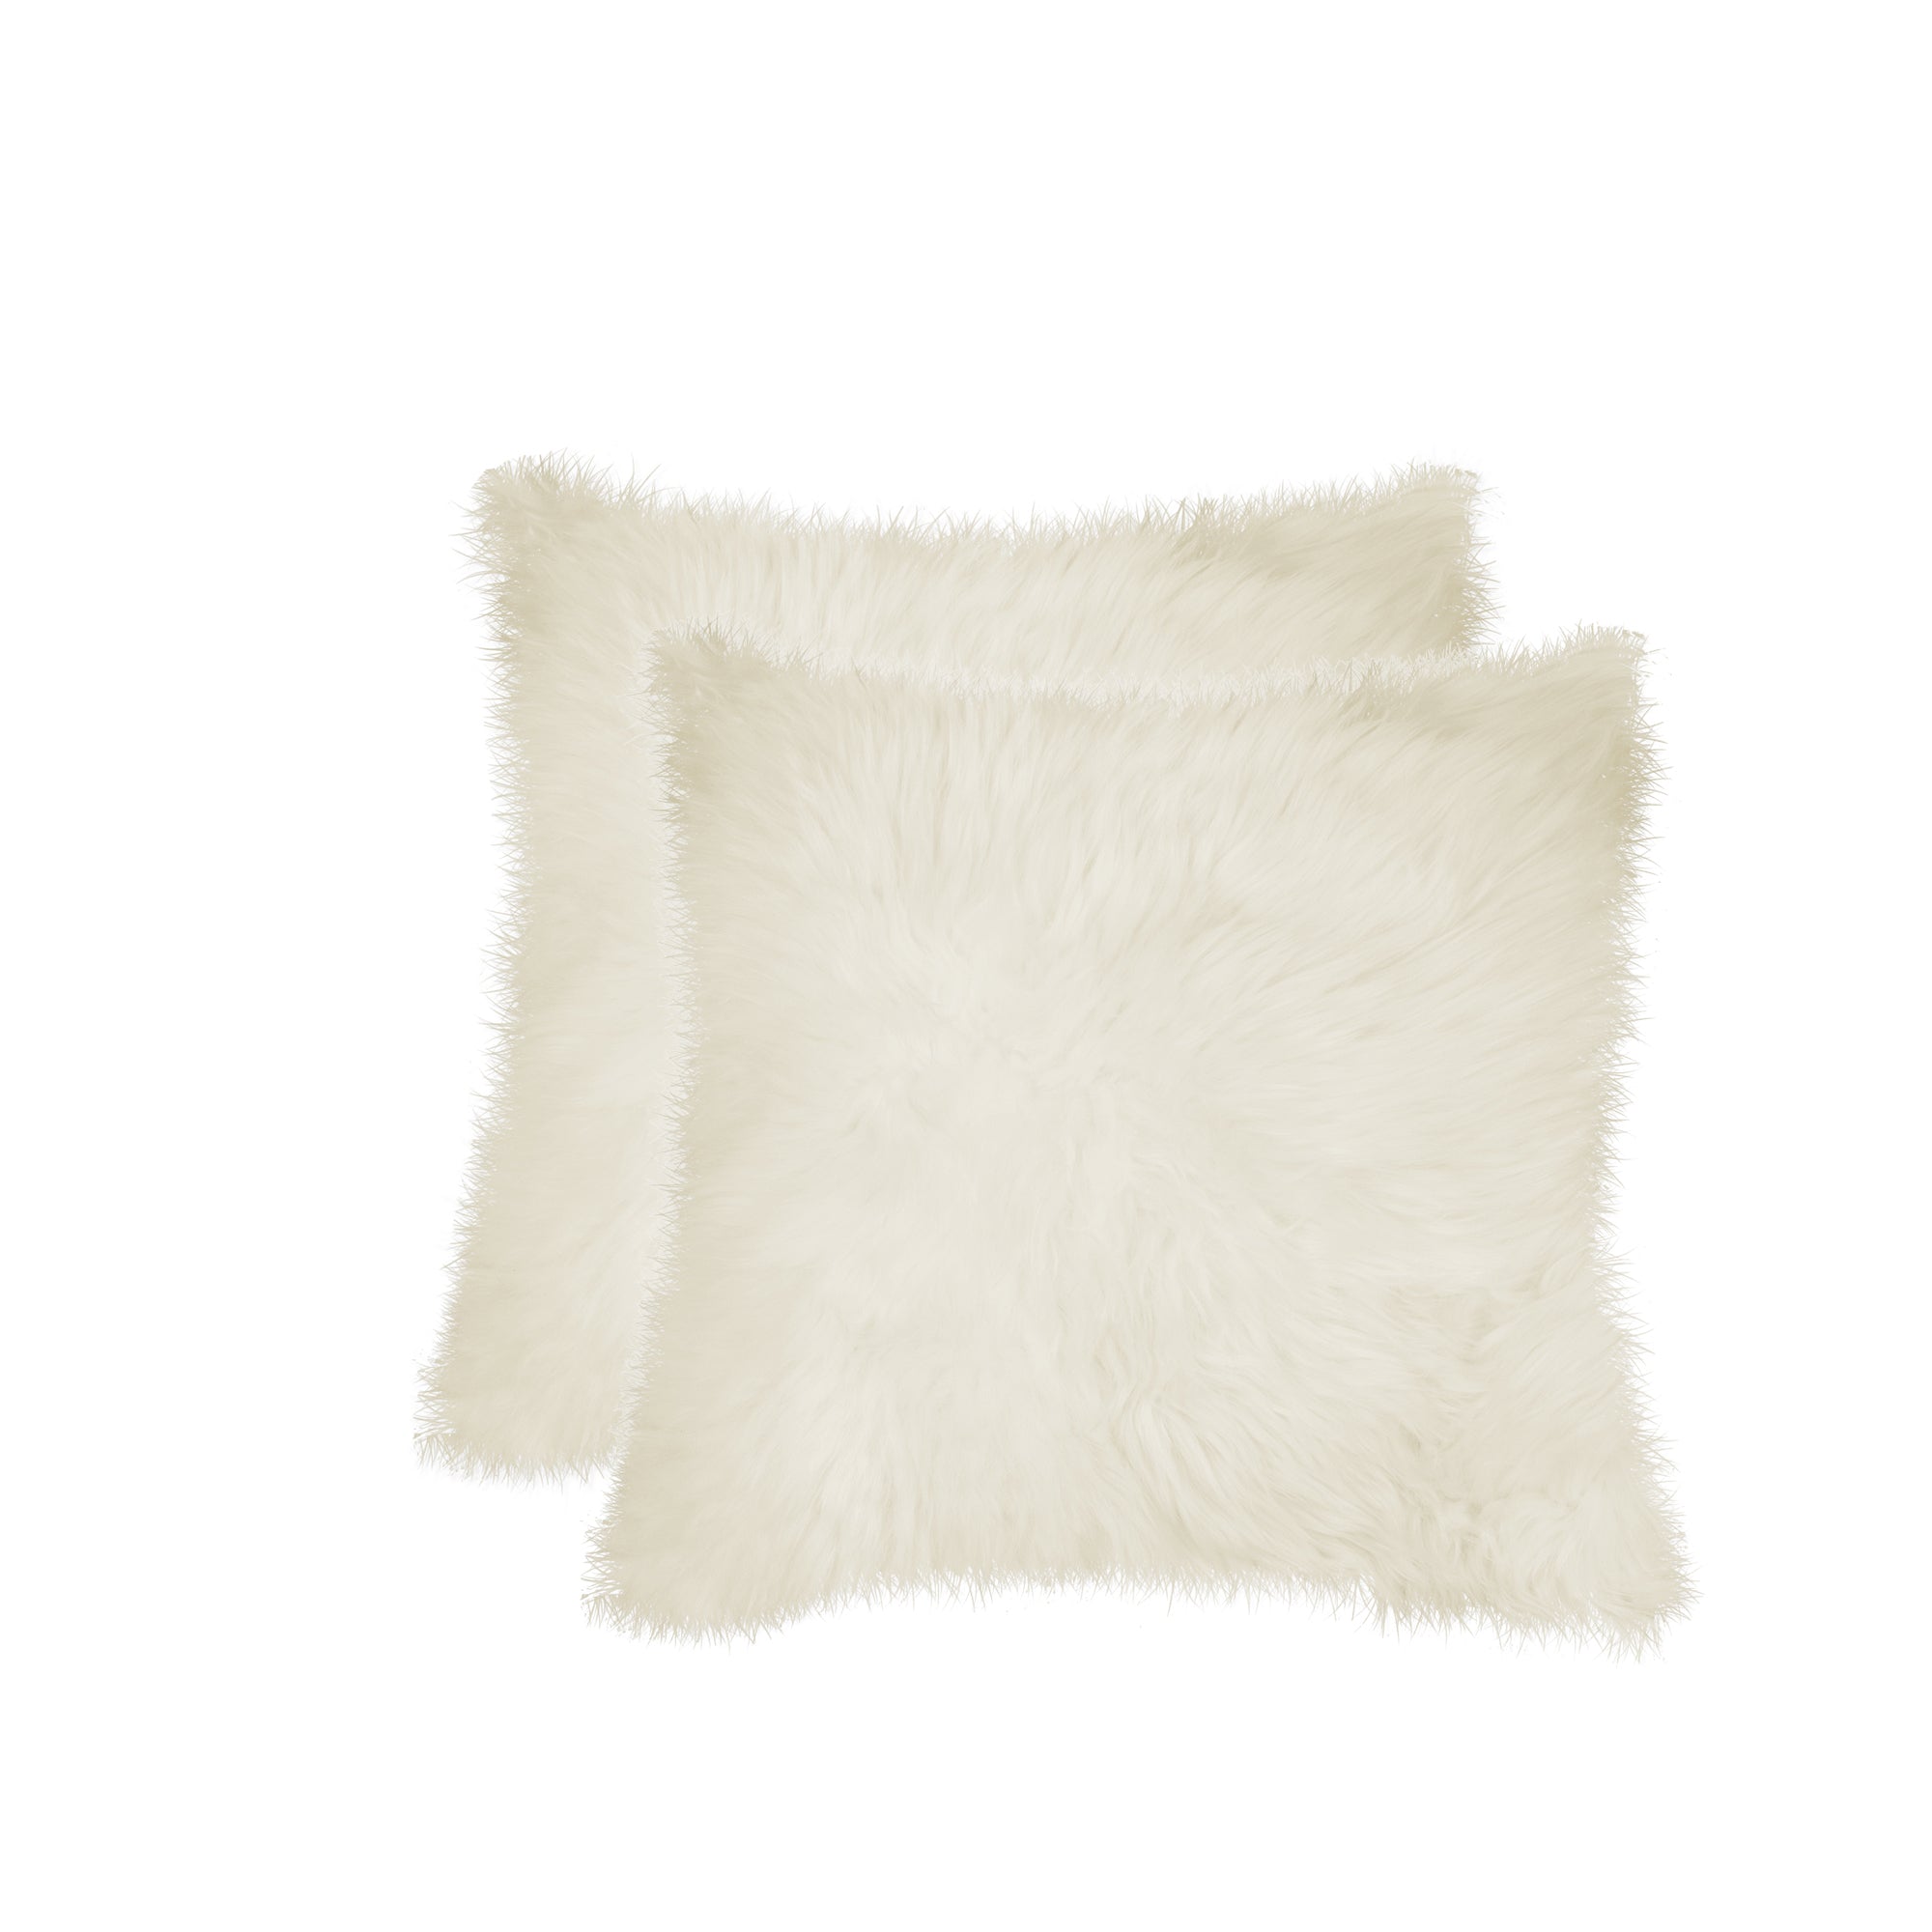 Set of Two 18" Natural Cowhide Throw Pillow